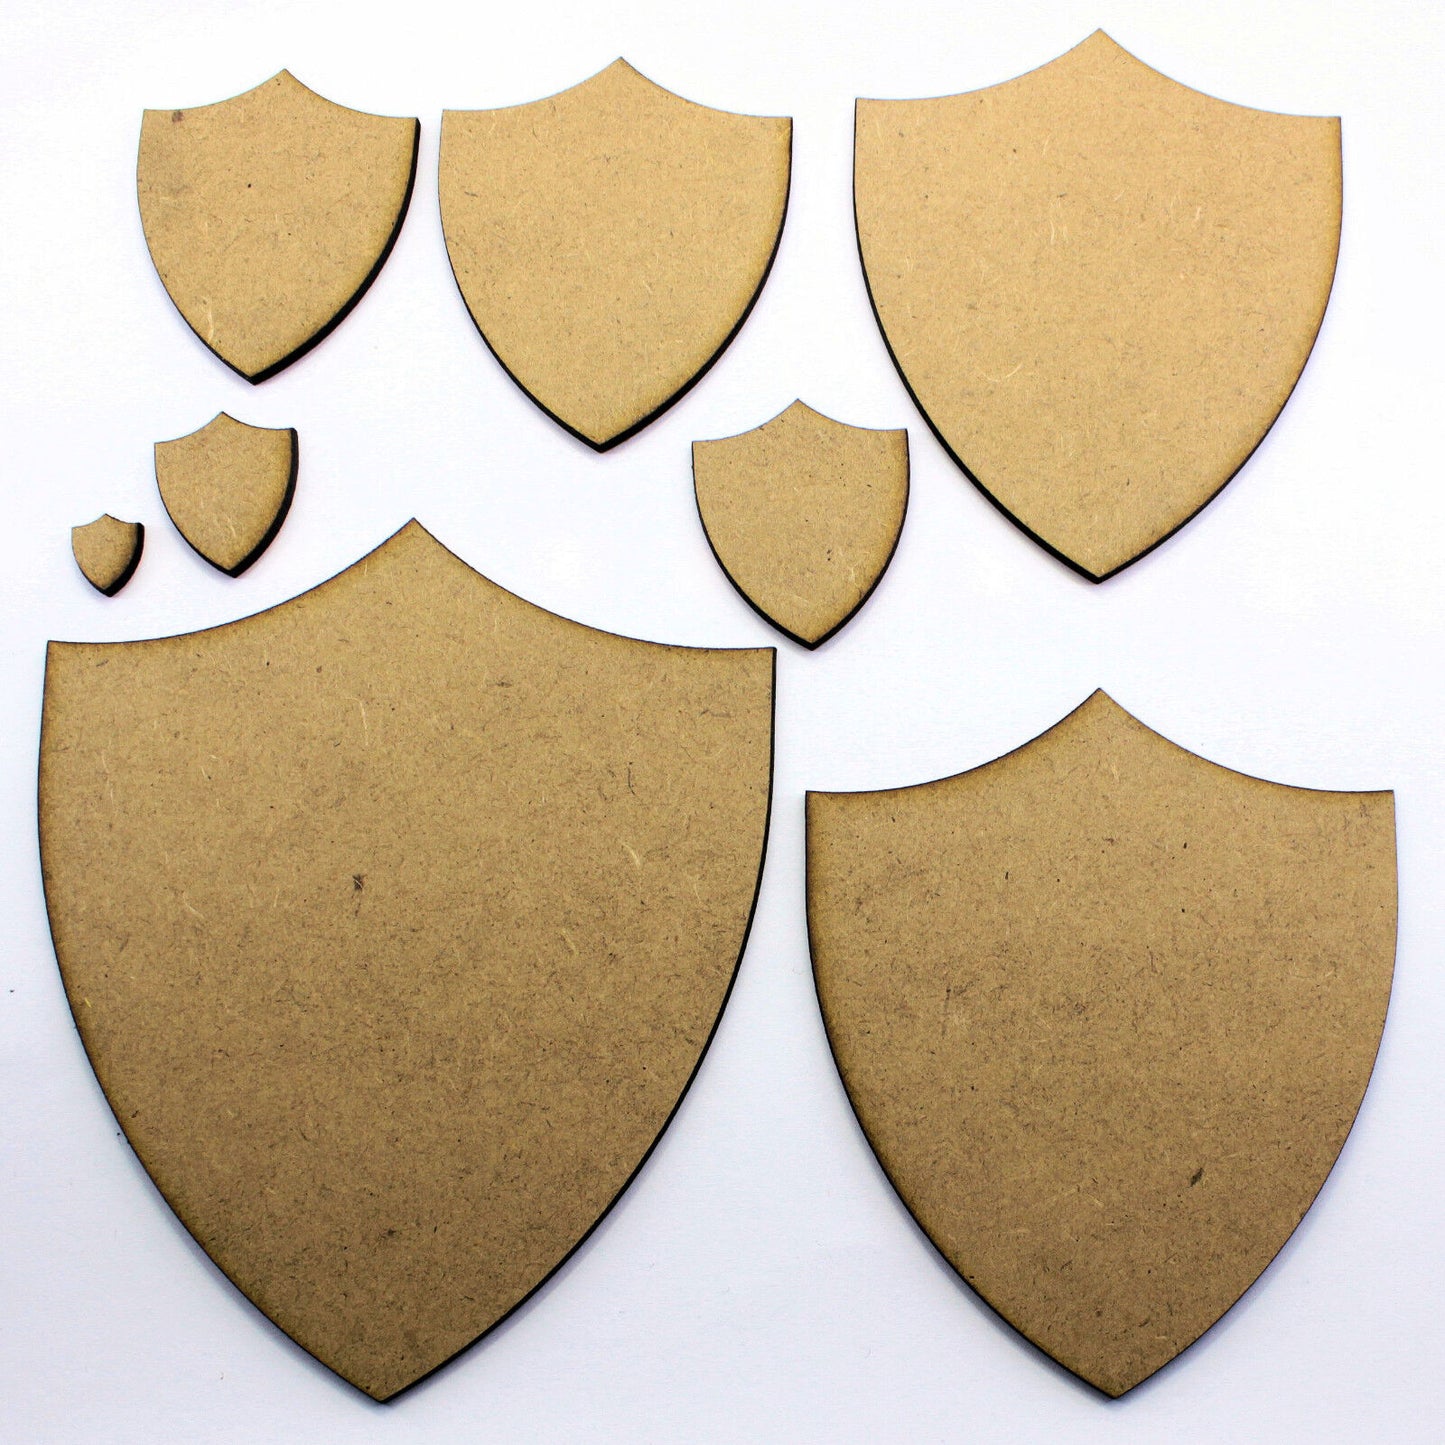 Medieval Shield Shapes. Medieval and Heraldry School Crafts, 2mm MDF Wood